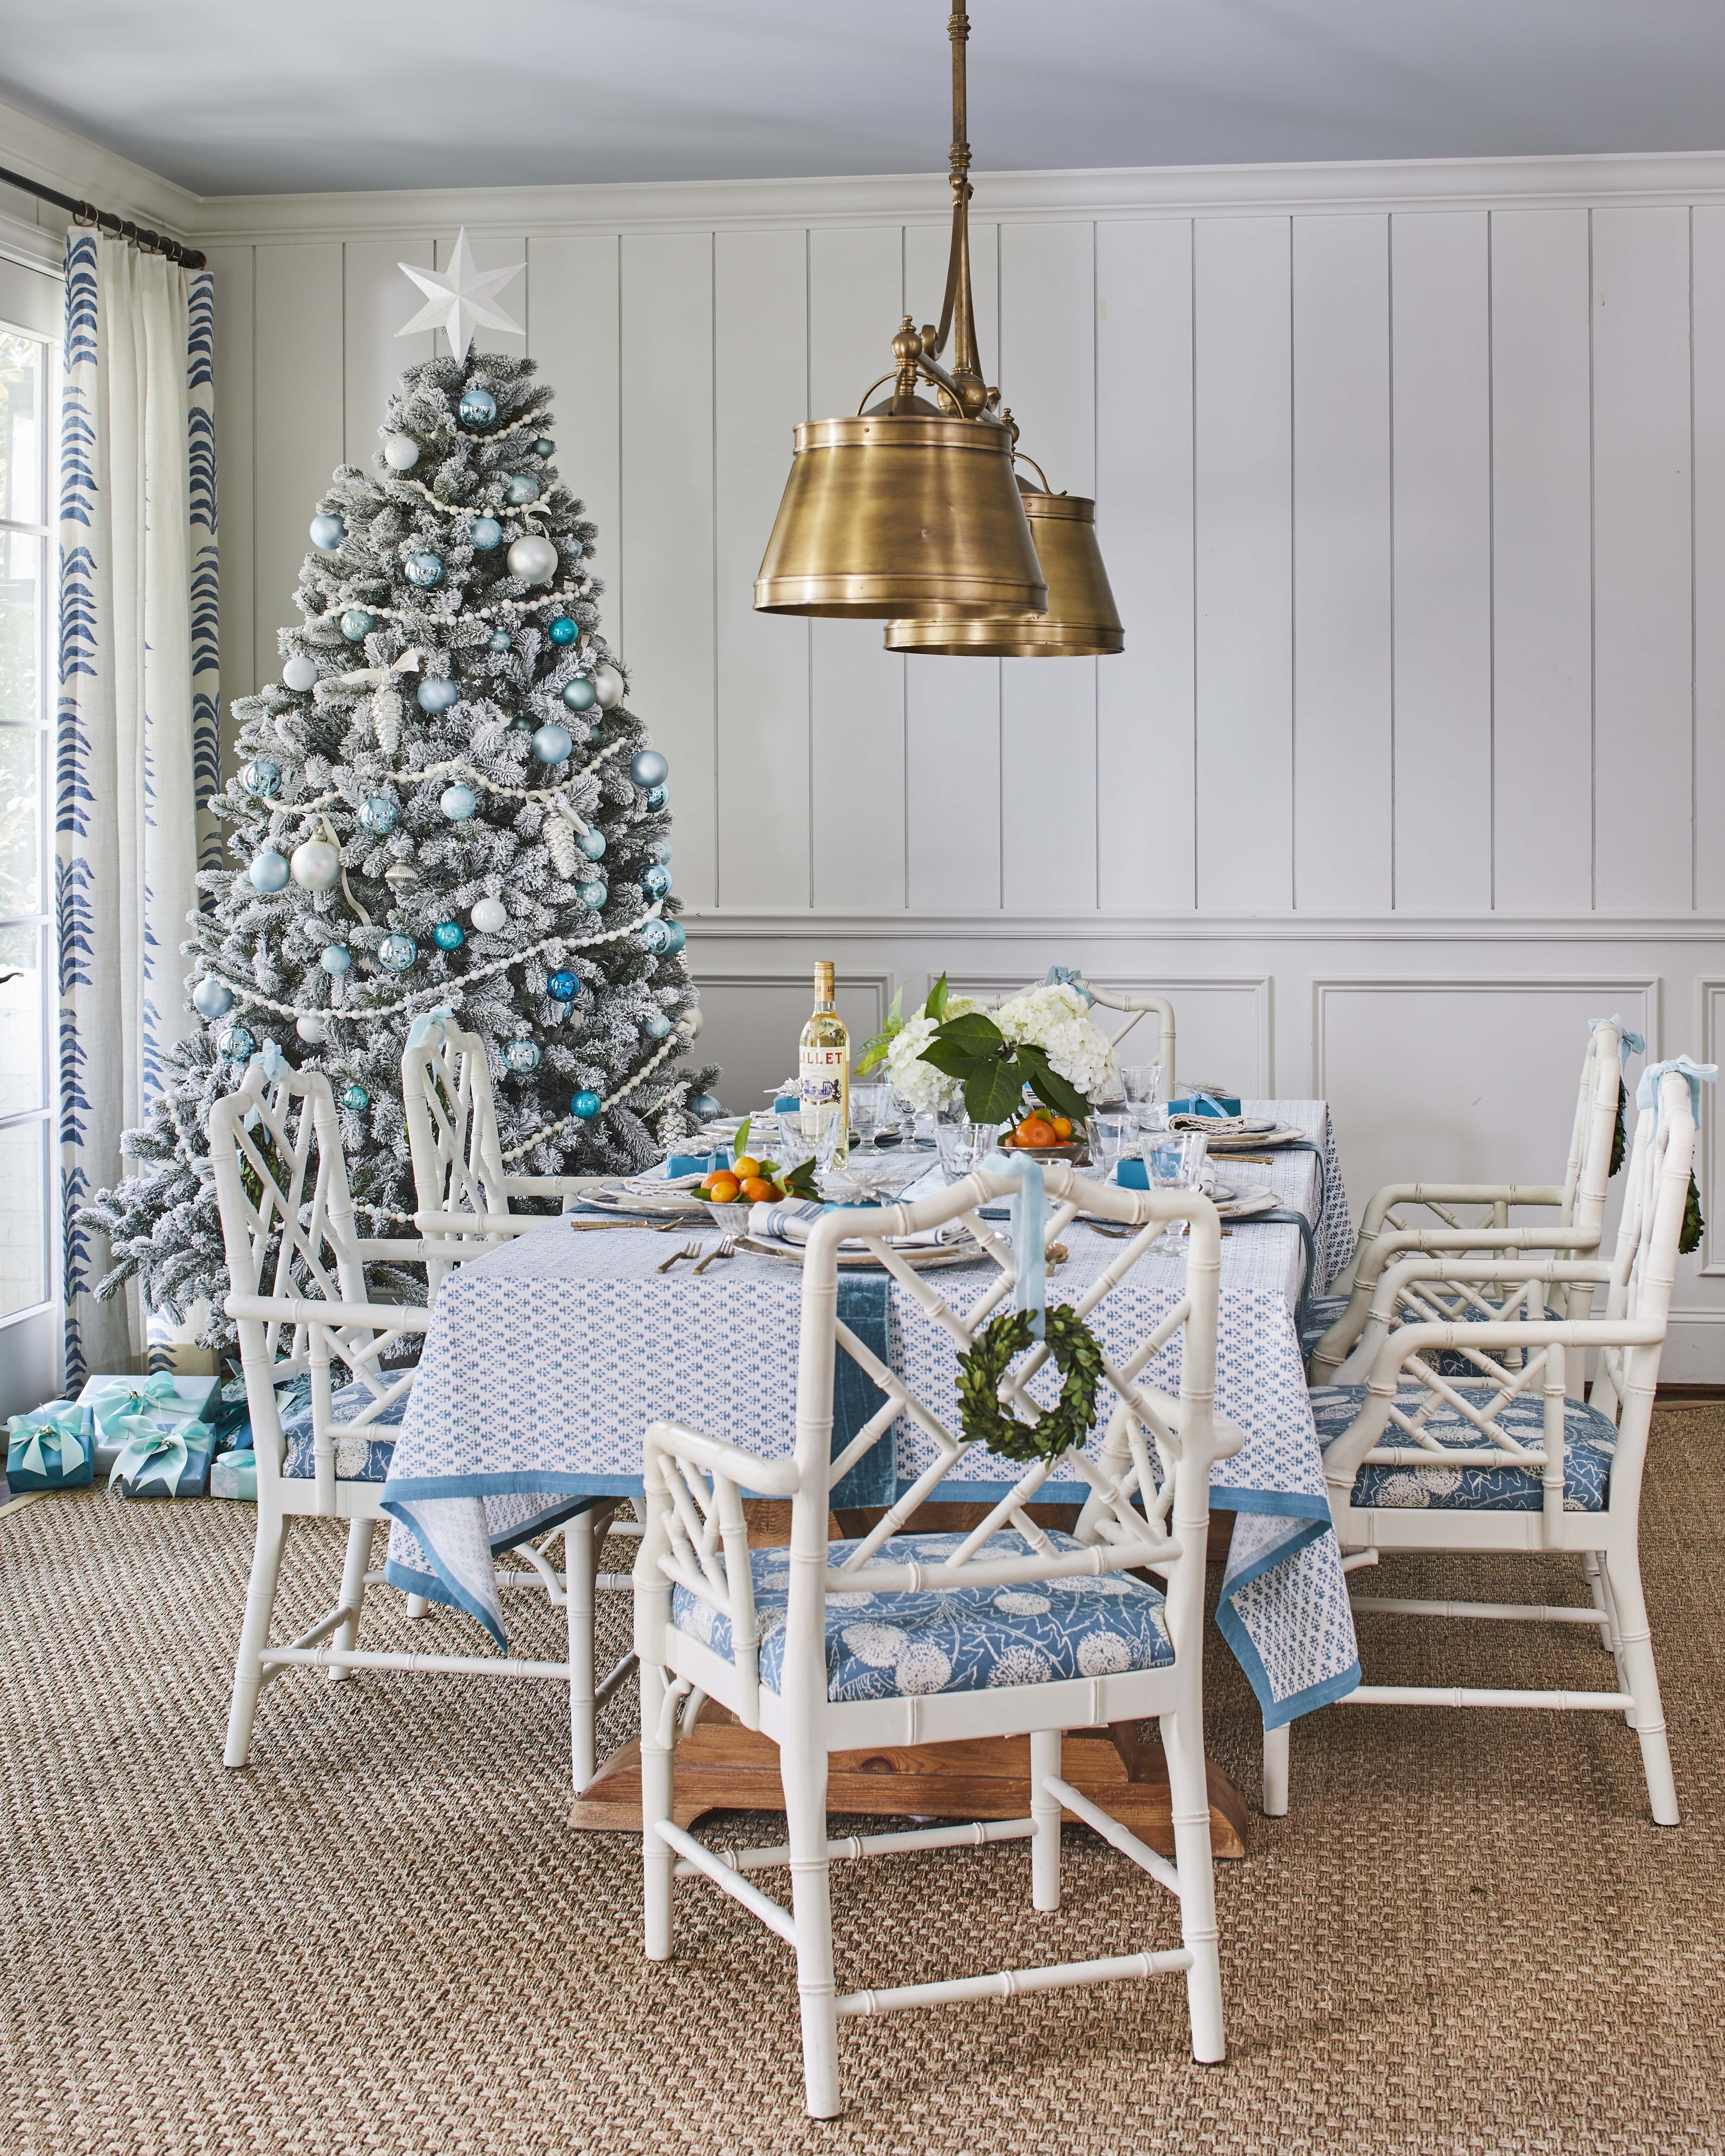 Beautiful Blue and White Christmas Home Decorating Ideas